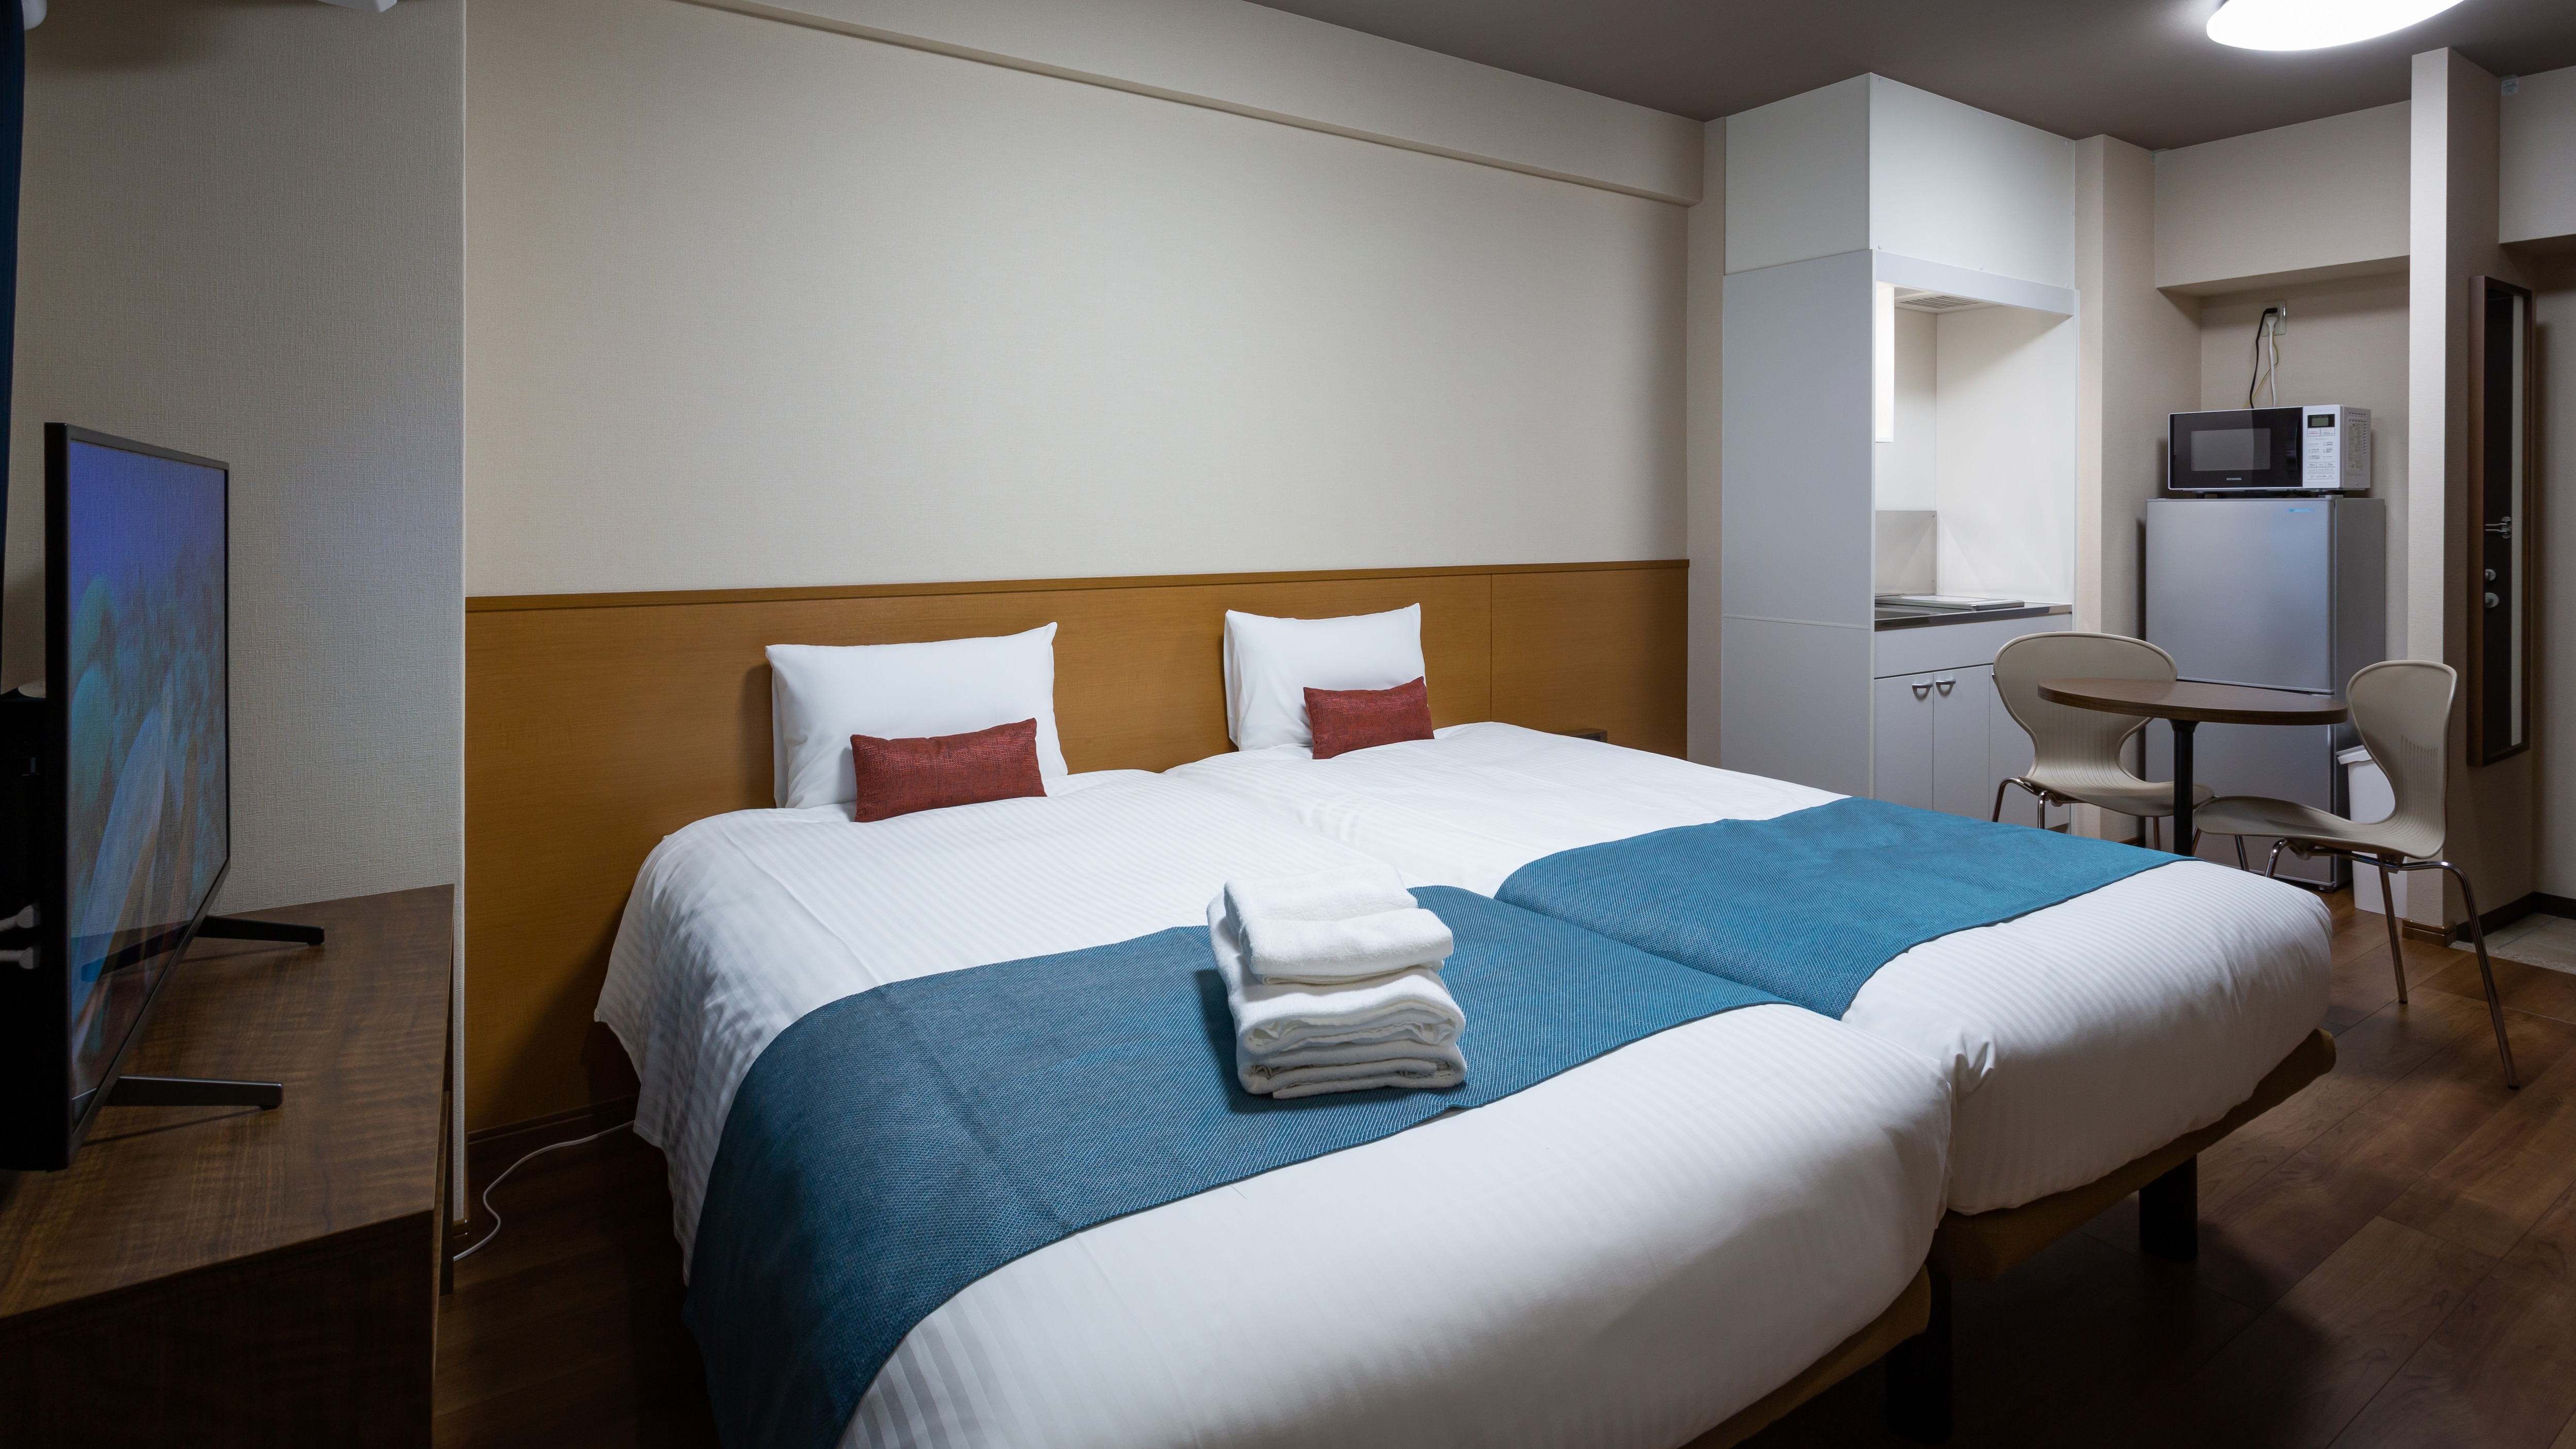 [Hollywood Twin] 25.2㎡, non-smoking, two 1030mm wide French beds placed side by side, perfect for family trips